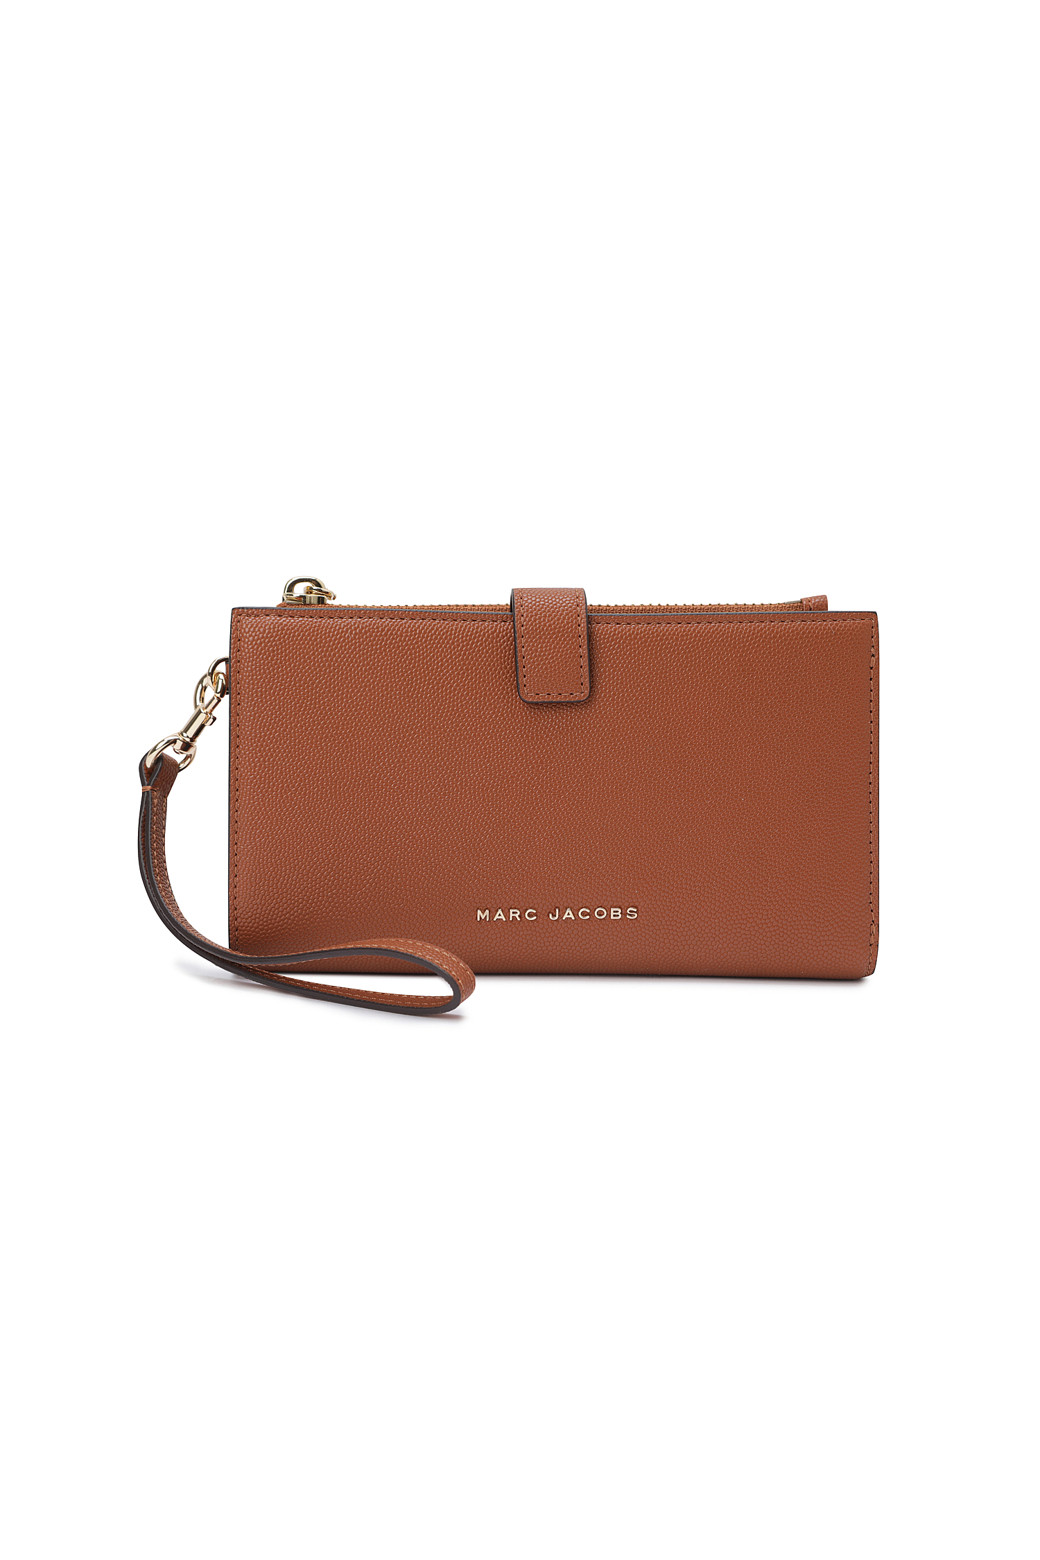 Marc Jacobs Brb Phone Wristlet In Smoked Almond